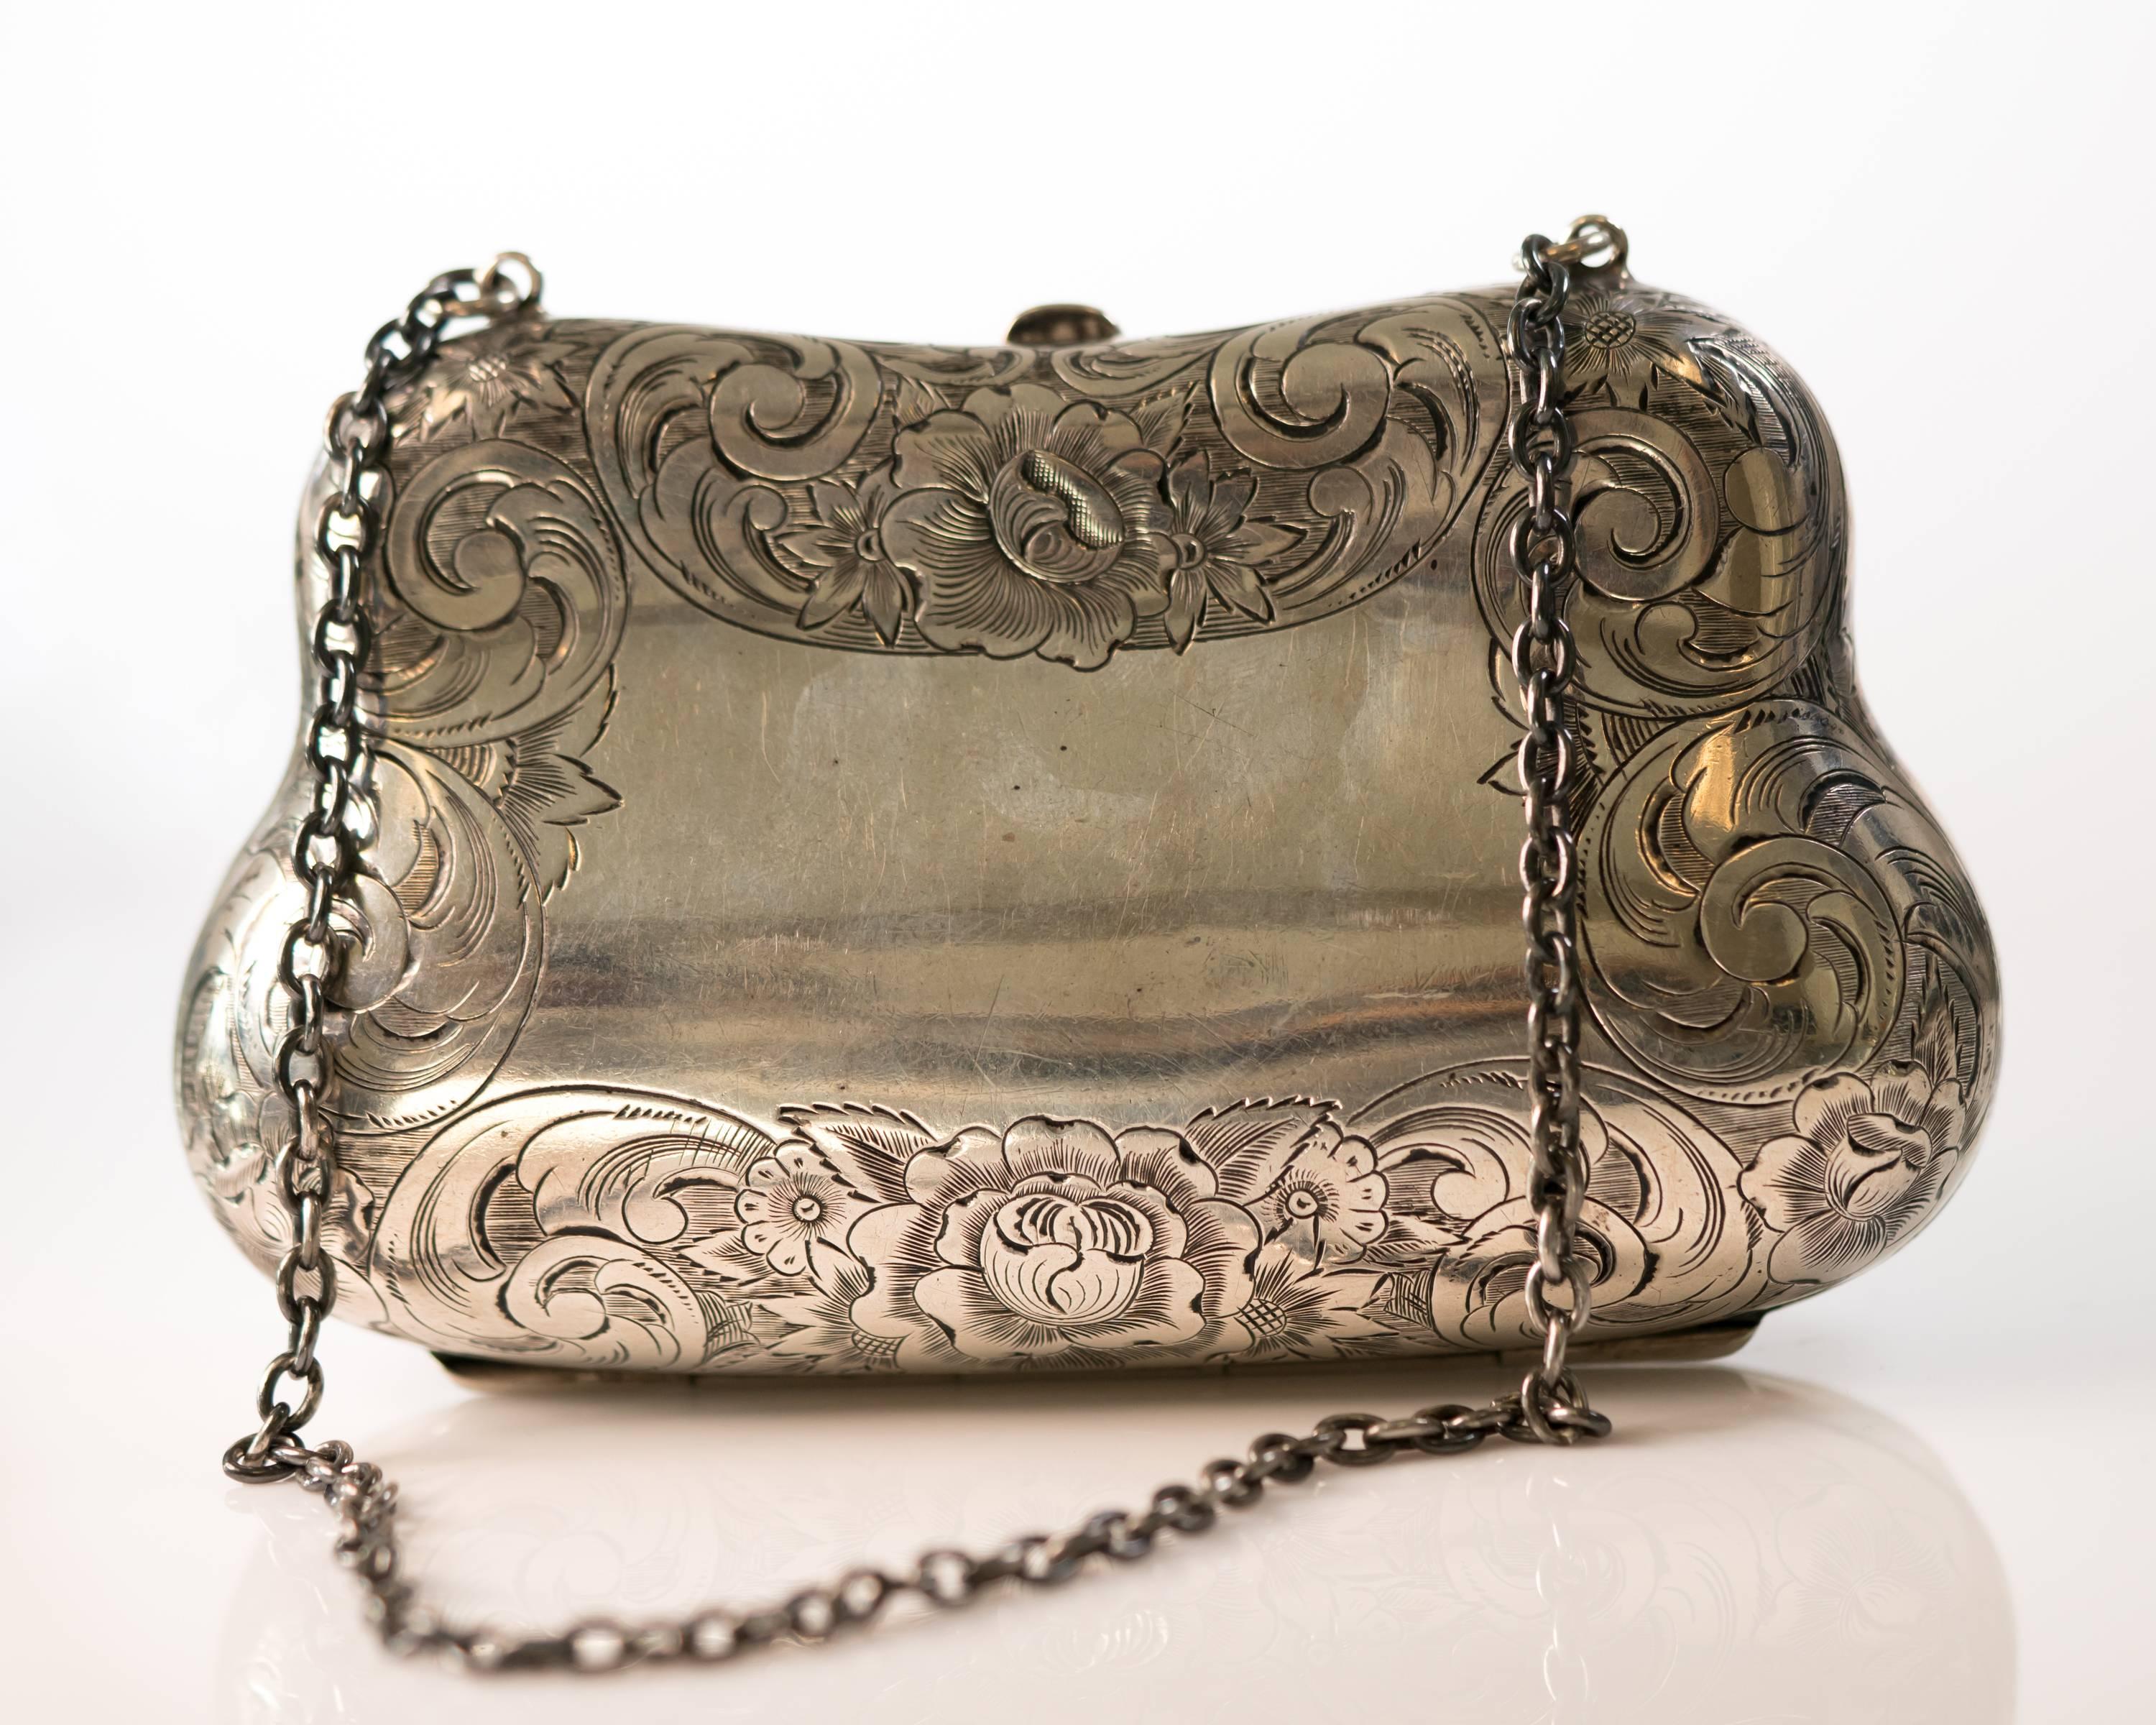 Women's 1940s Sterling Silver Floral Engraved Clutch